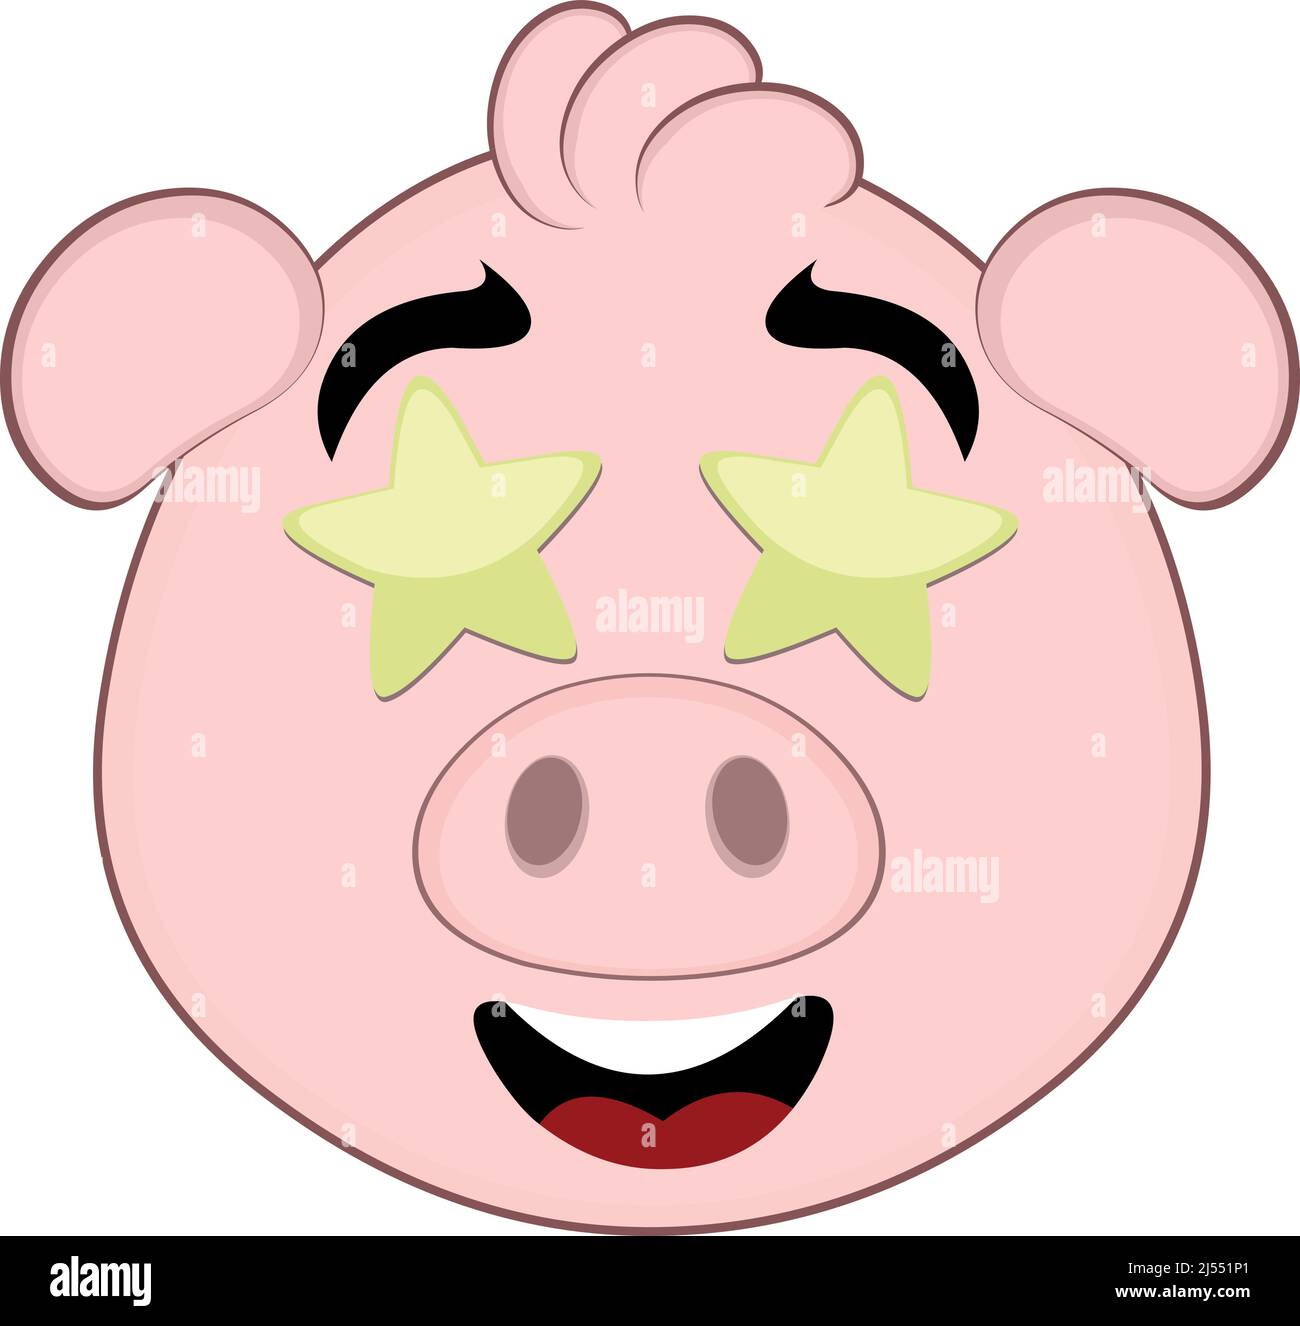 Vector illustration of a cartoon pig face with a happy expression and star shaped eyes Stock Vector